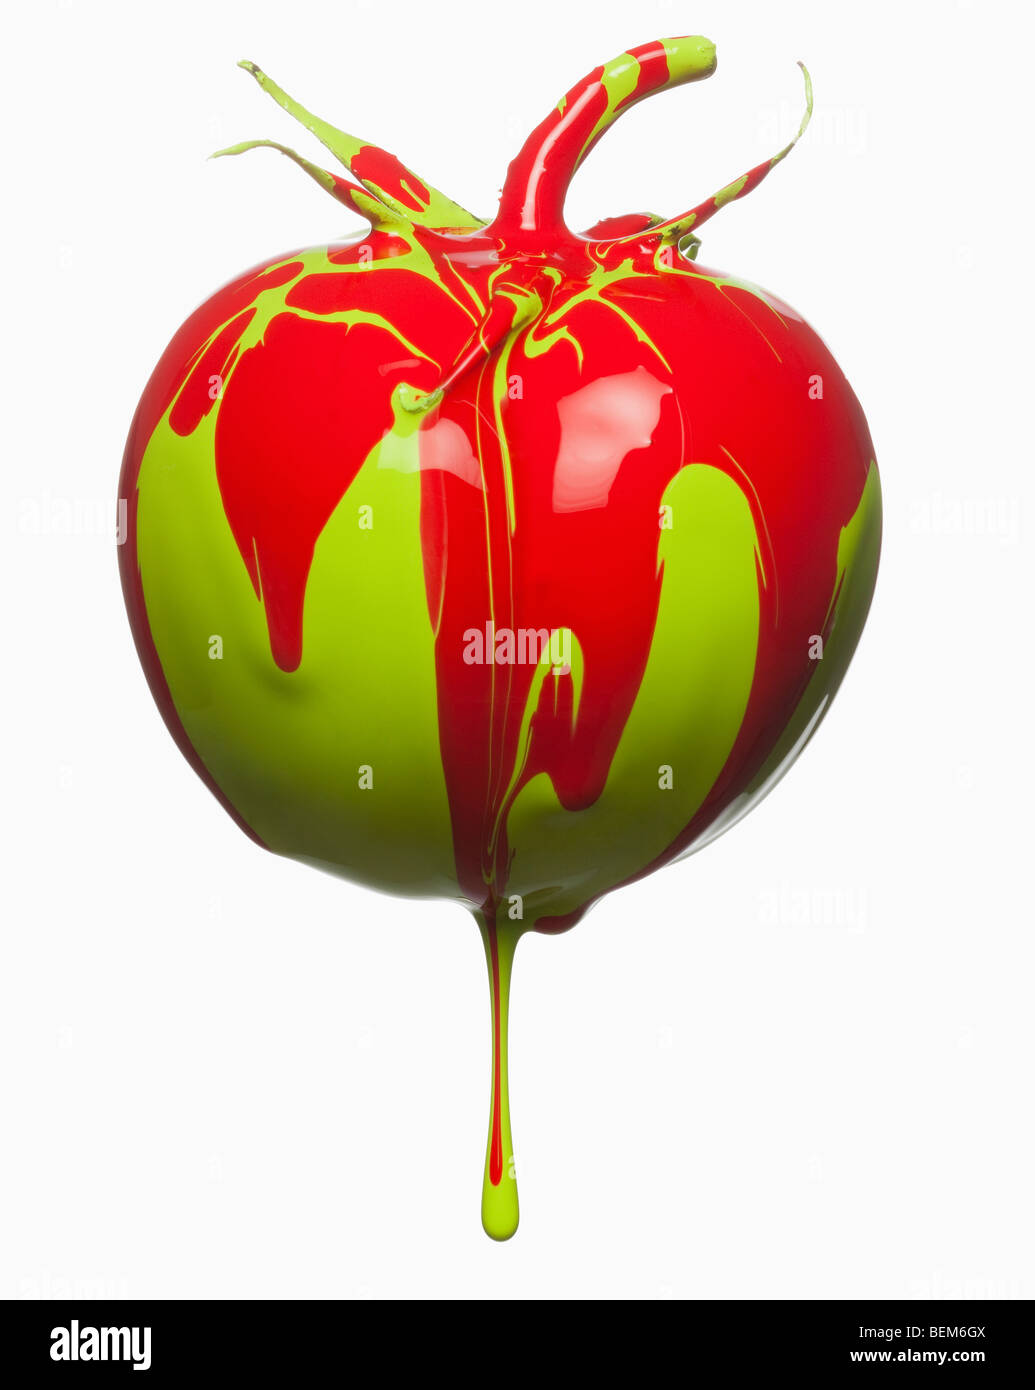 Tomatoe dripping with color Stock Photo